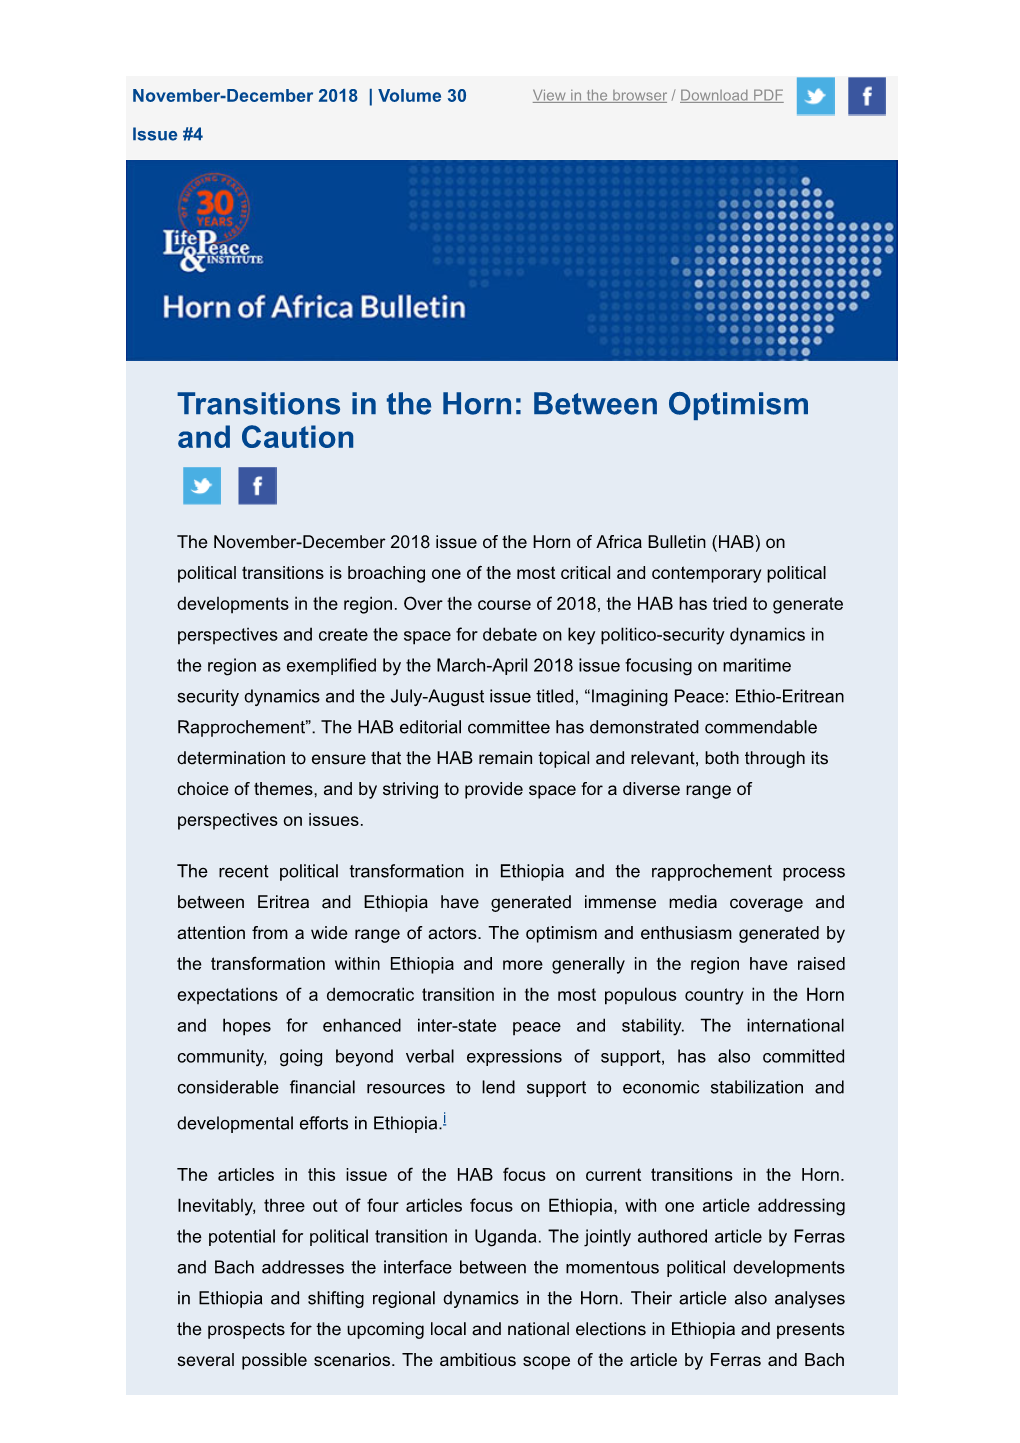 Transitions in the Horn: Between Optimism and Caution